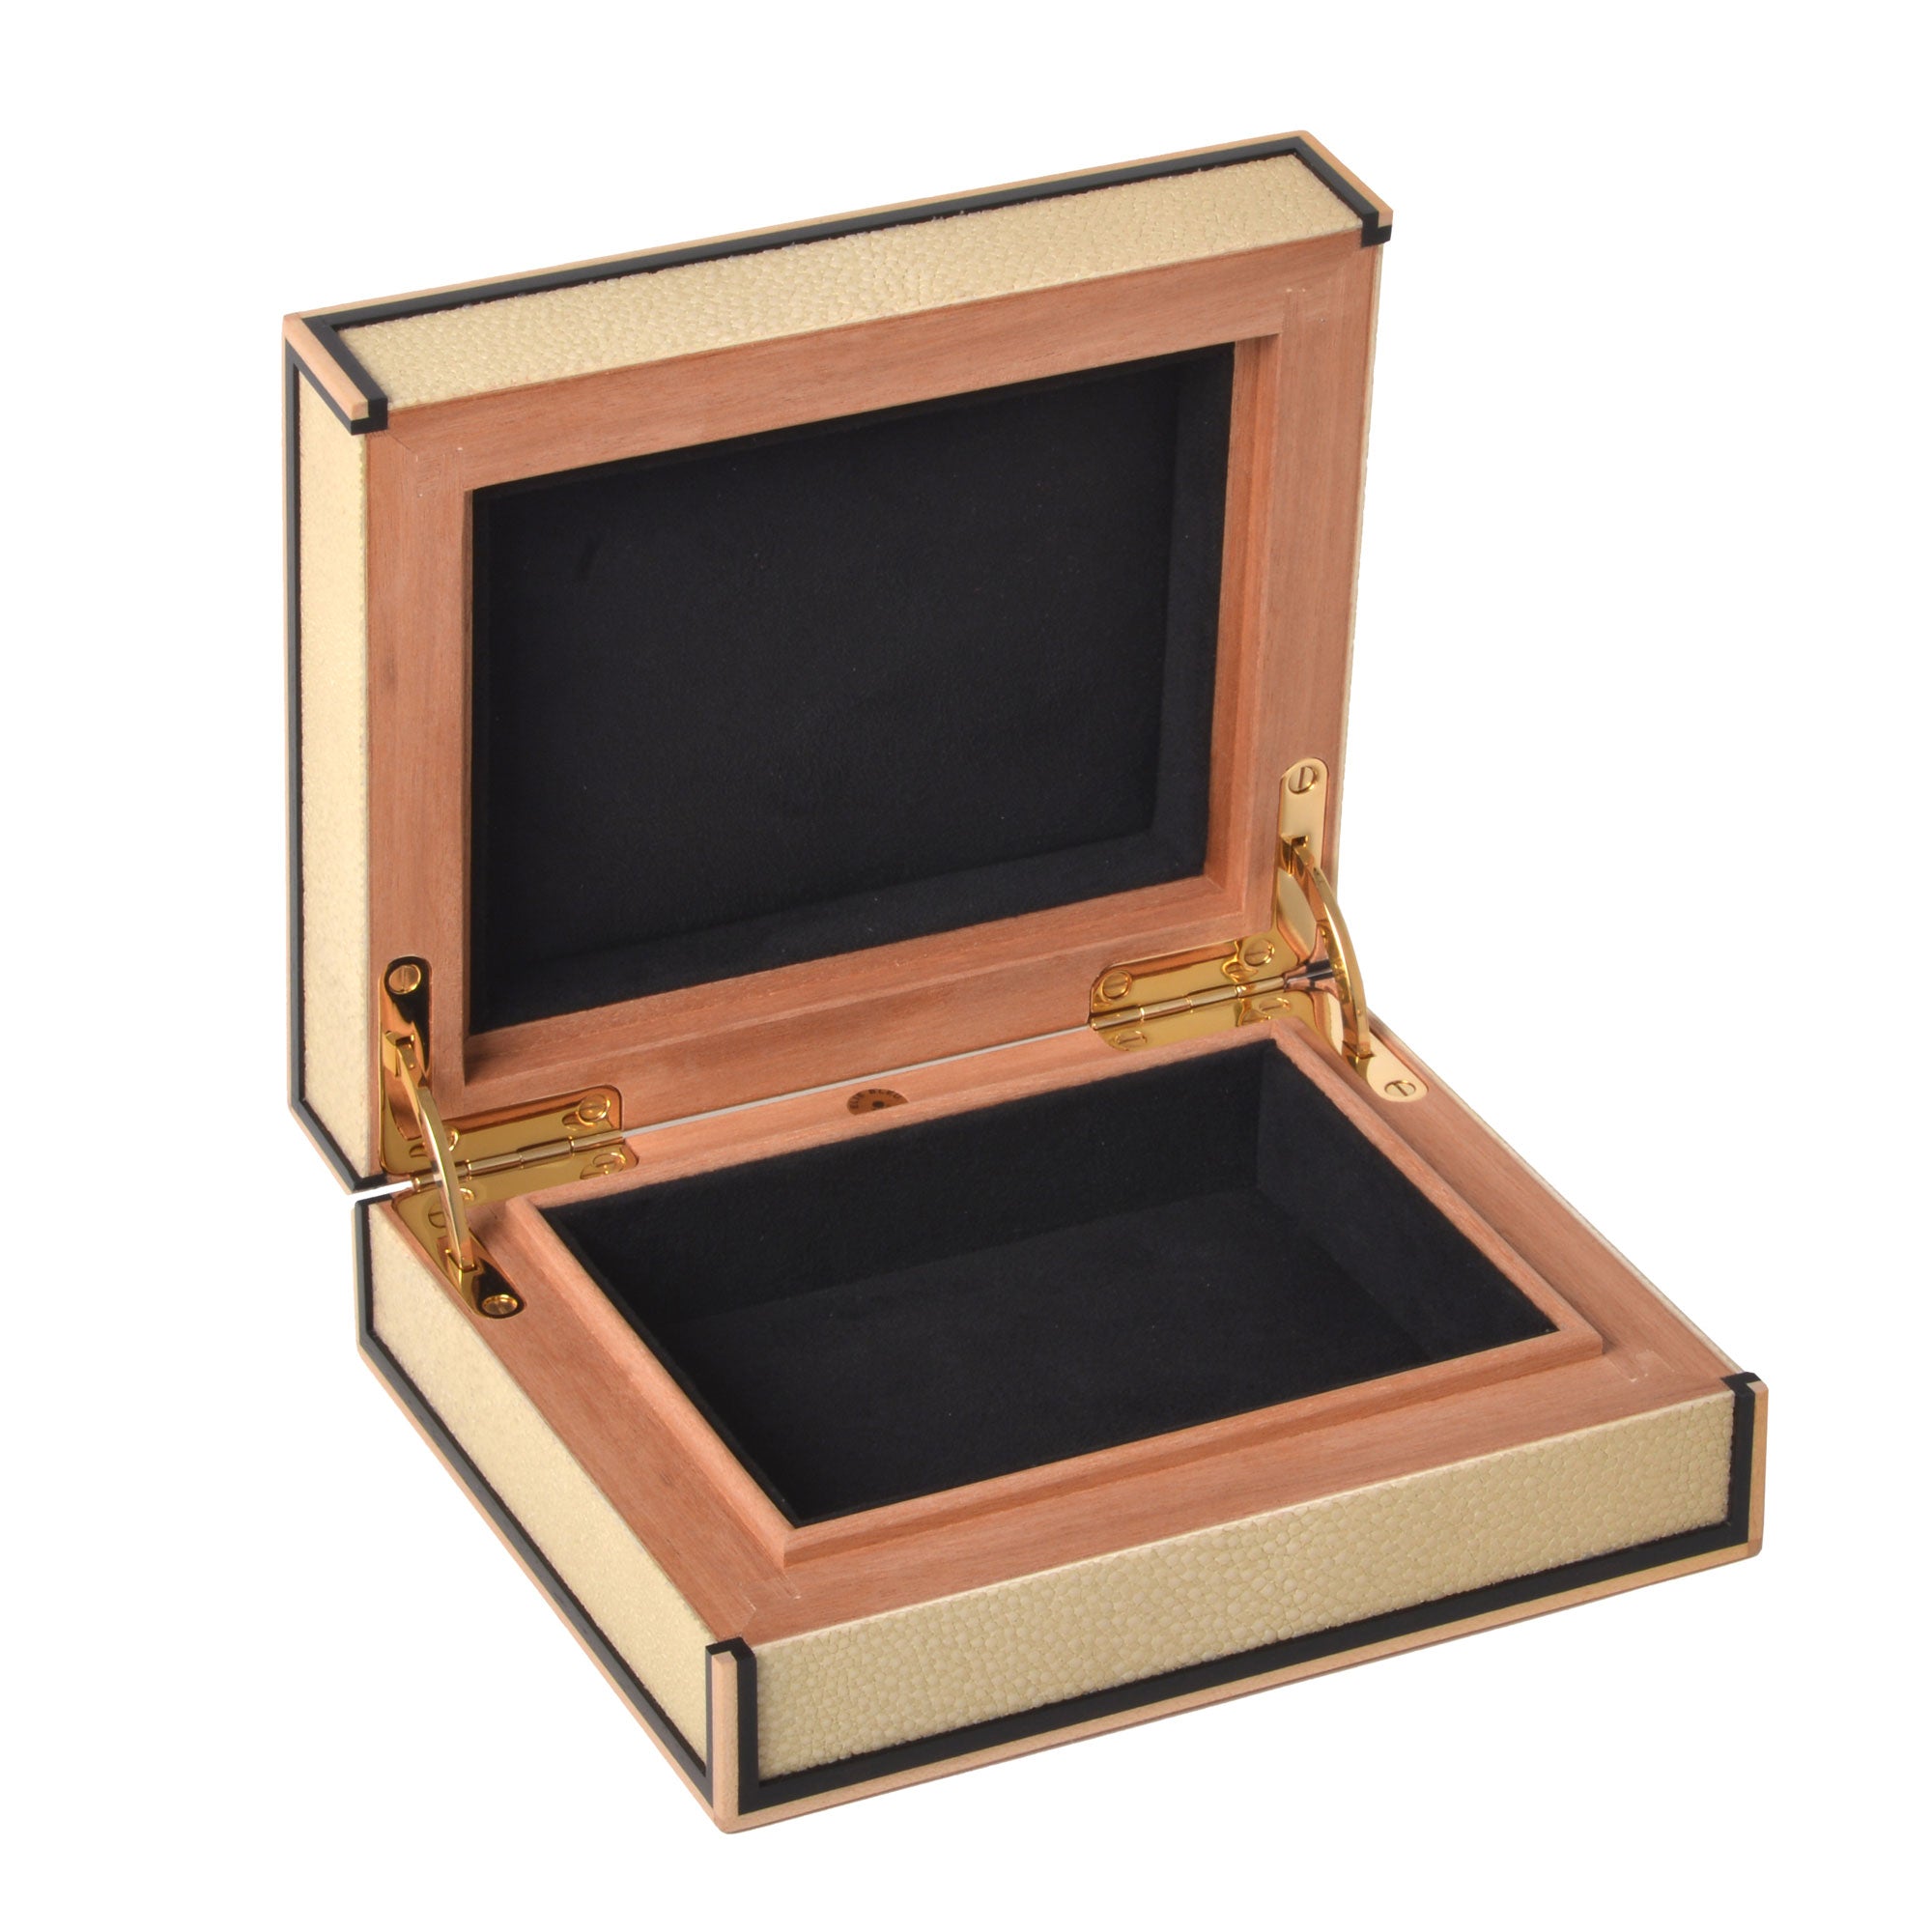 "Shagreen" - Box for 6 rings or 6 pairs of cufflinks